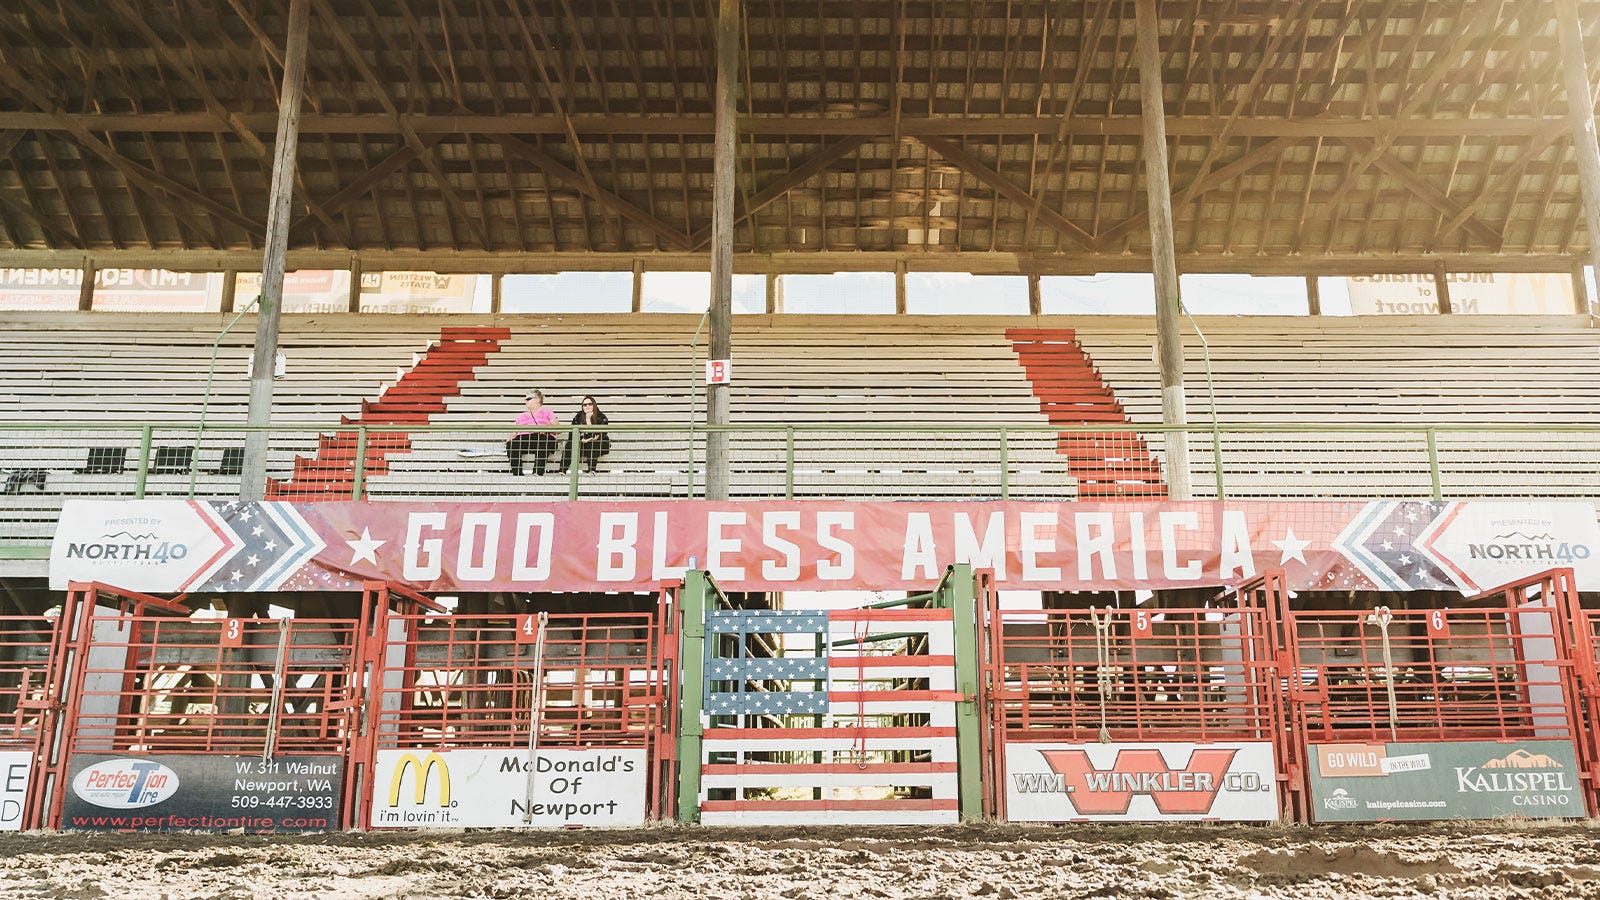 North 40 "God bless America" banner infront of stadium seats